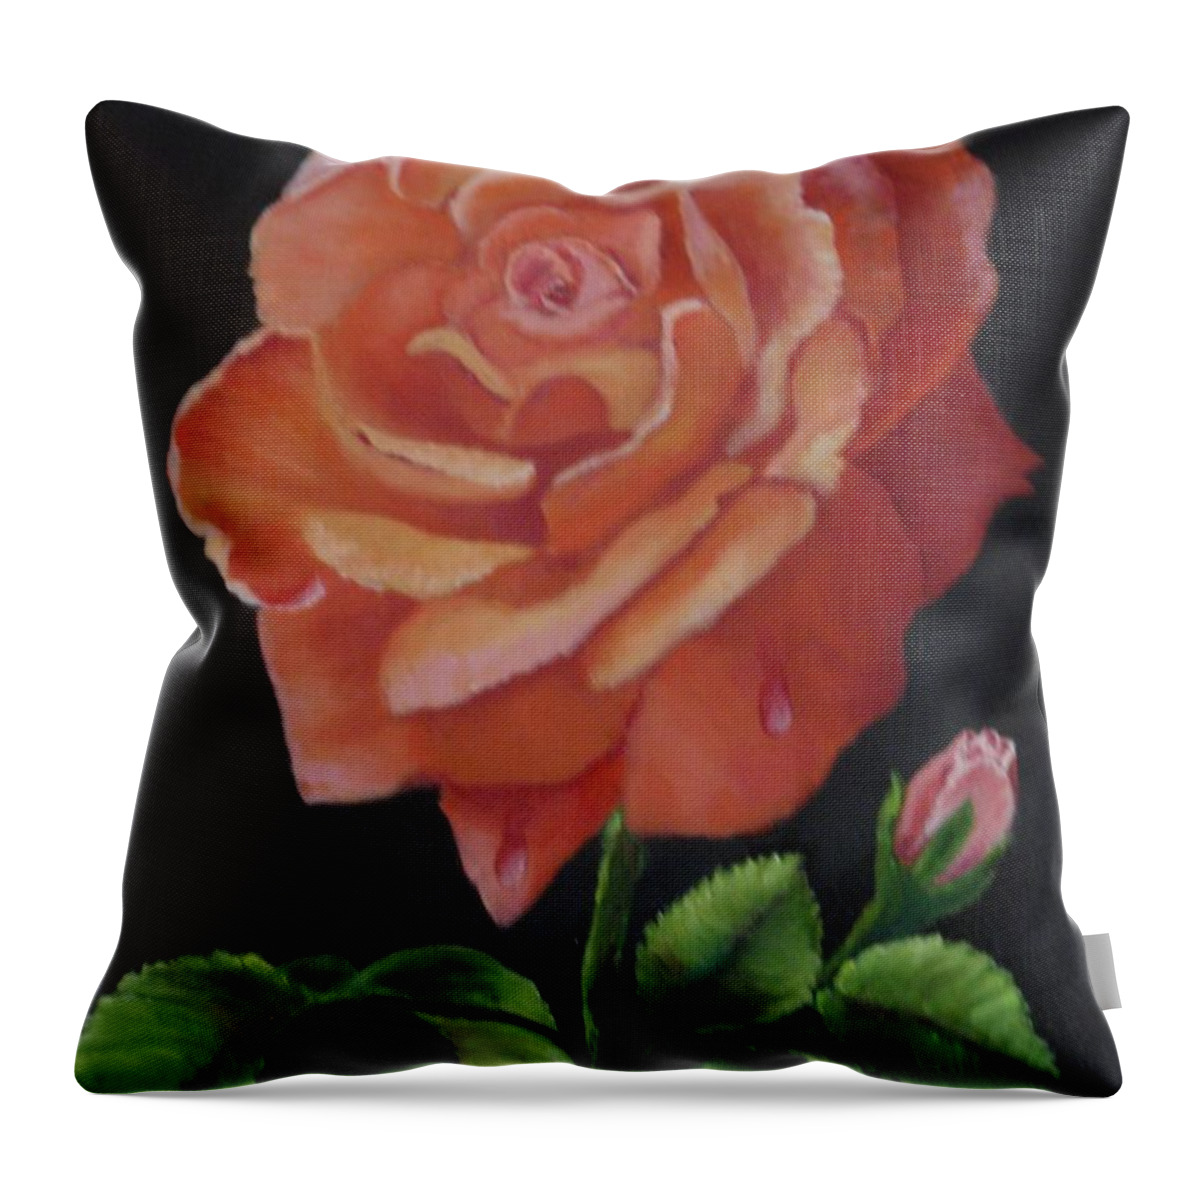 Red Rose Throw Pillow featuring the painting American Rose by Janis Tafoya